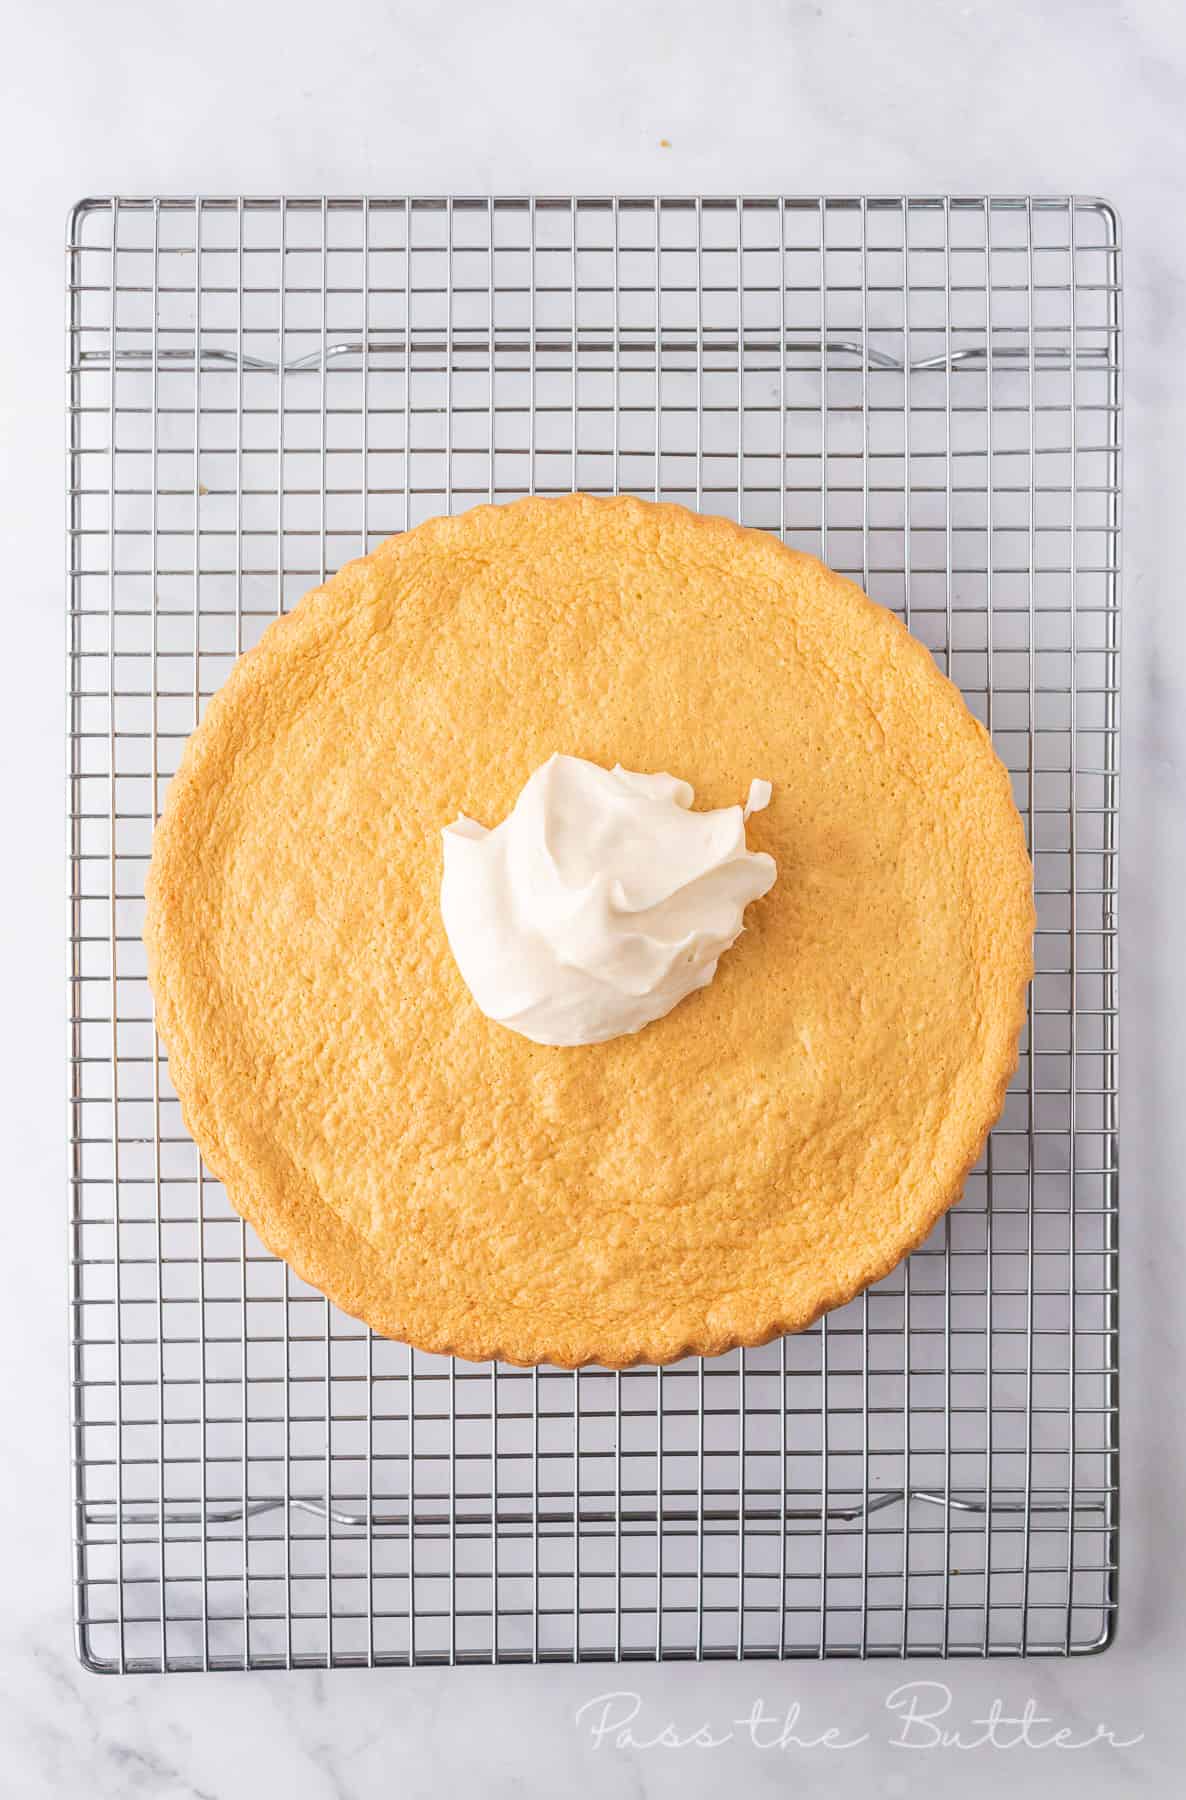 Spread the whipped cream over the flan base